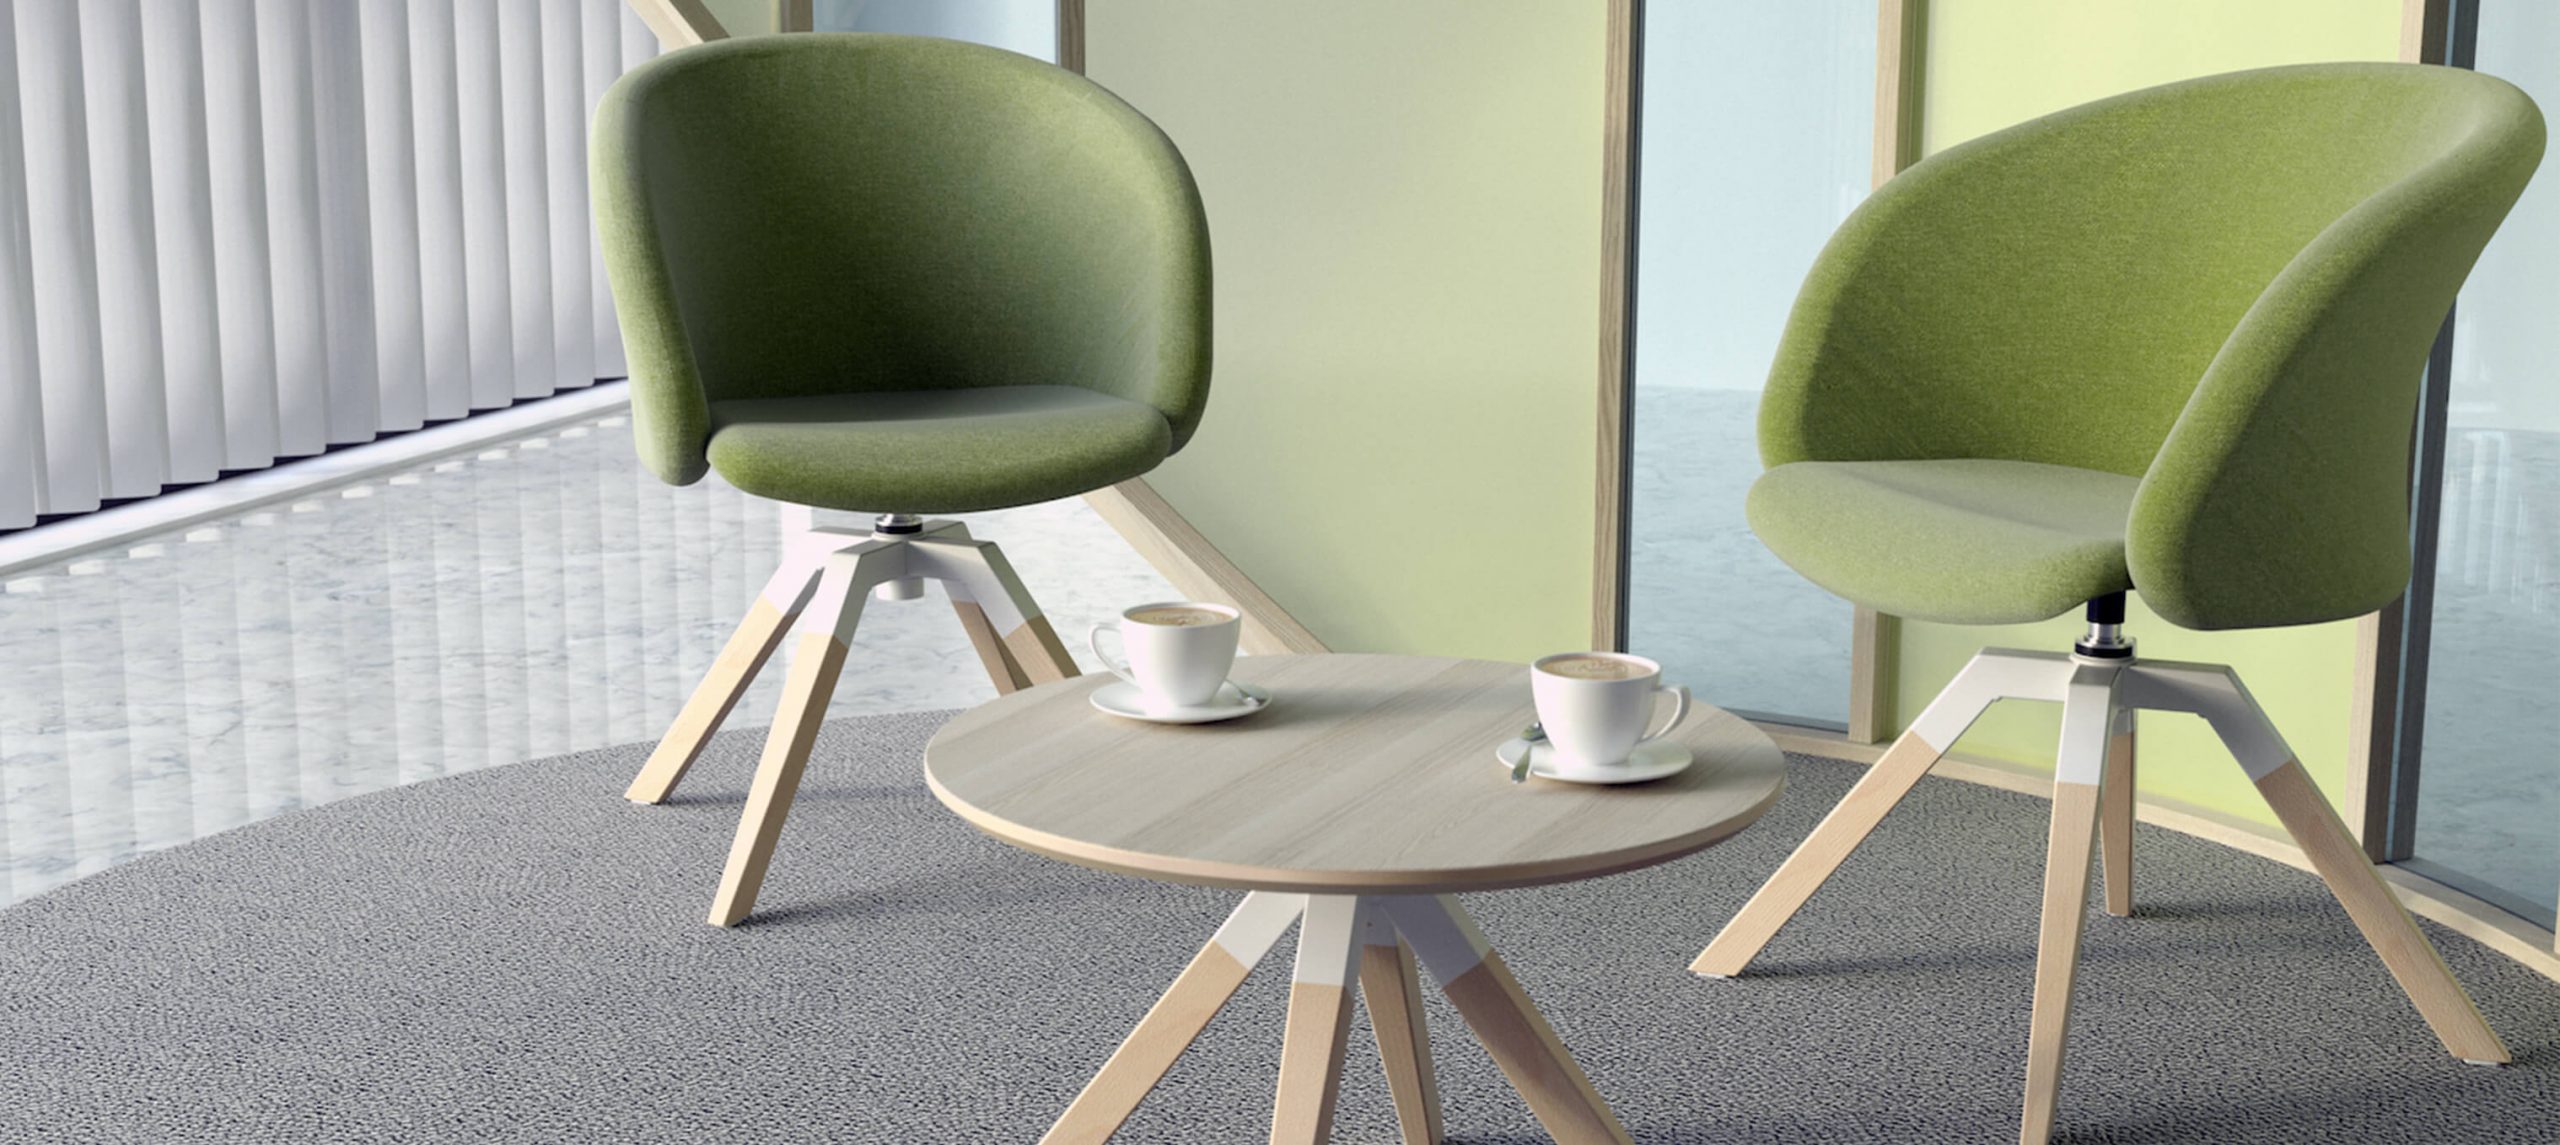 A-Cross Coffee Table & Junea Soft seating 